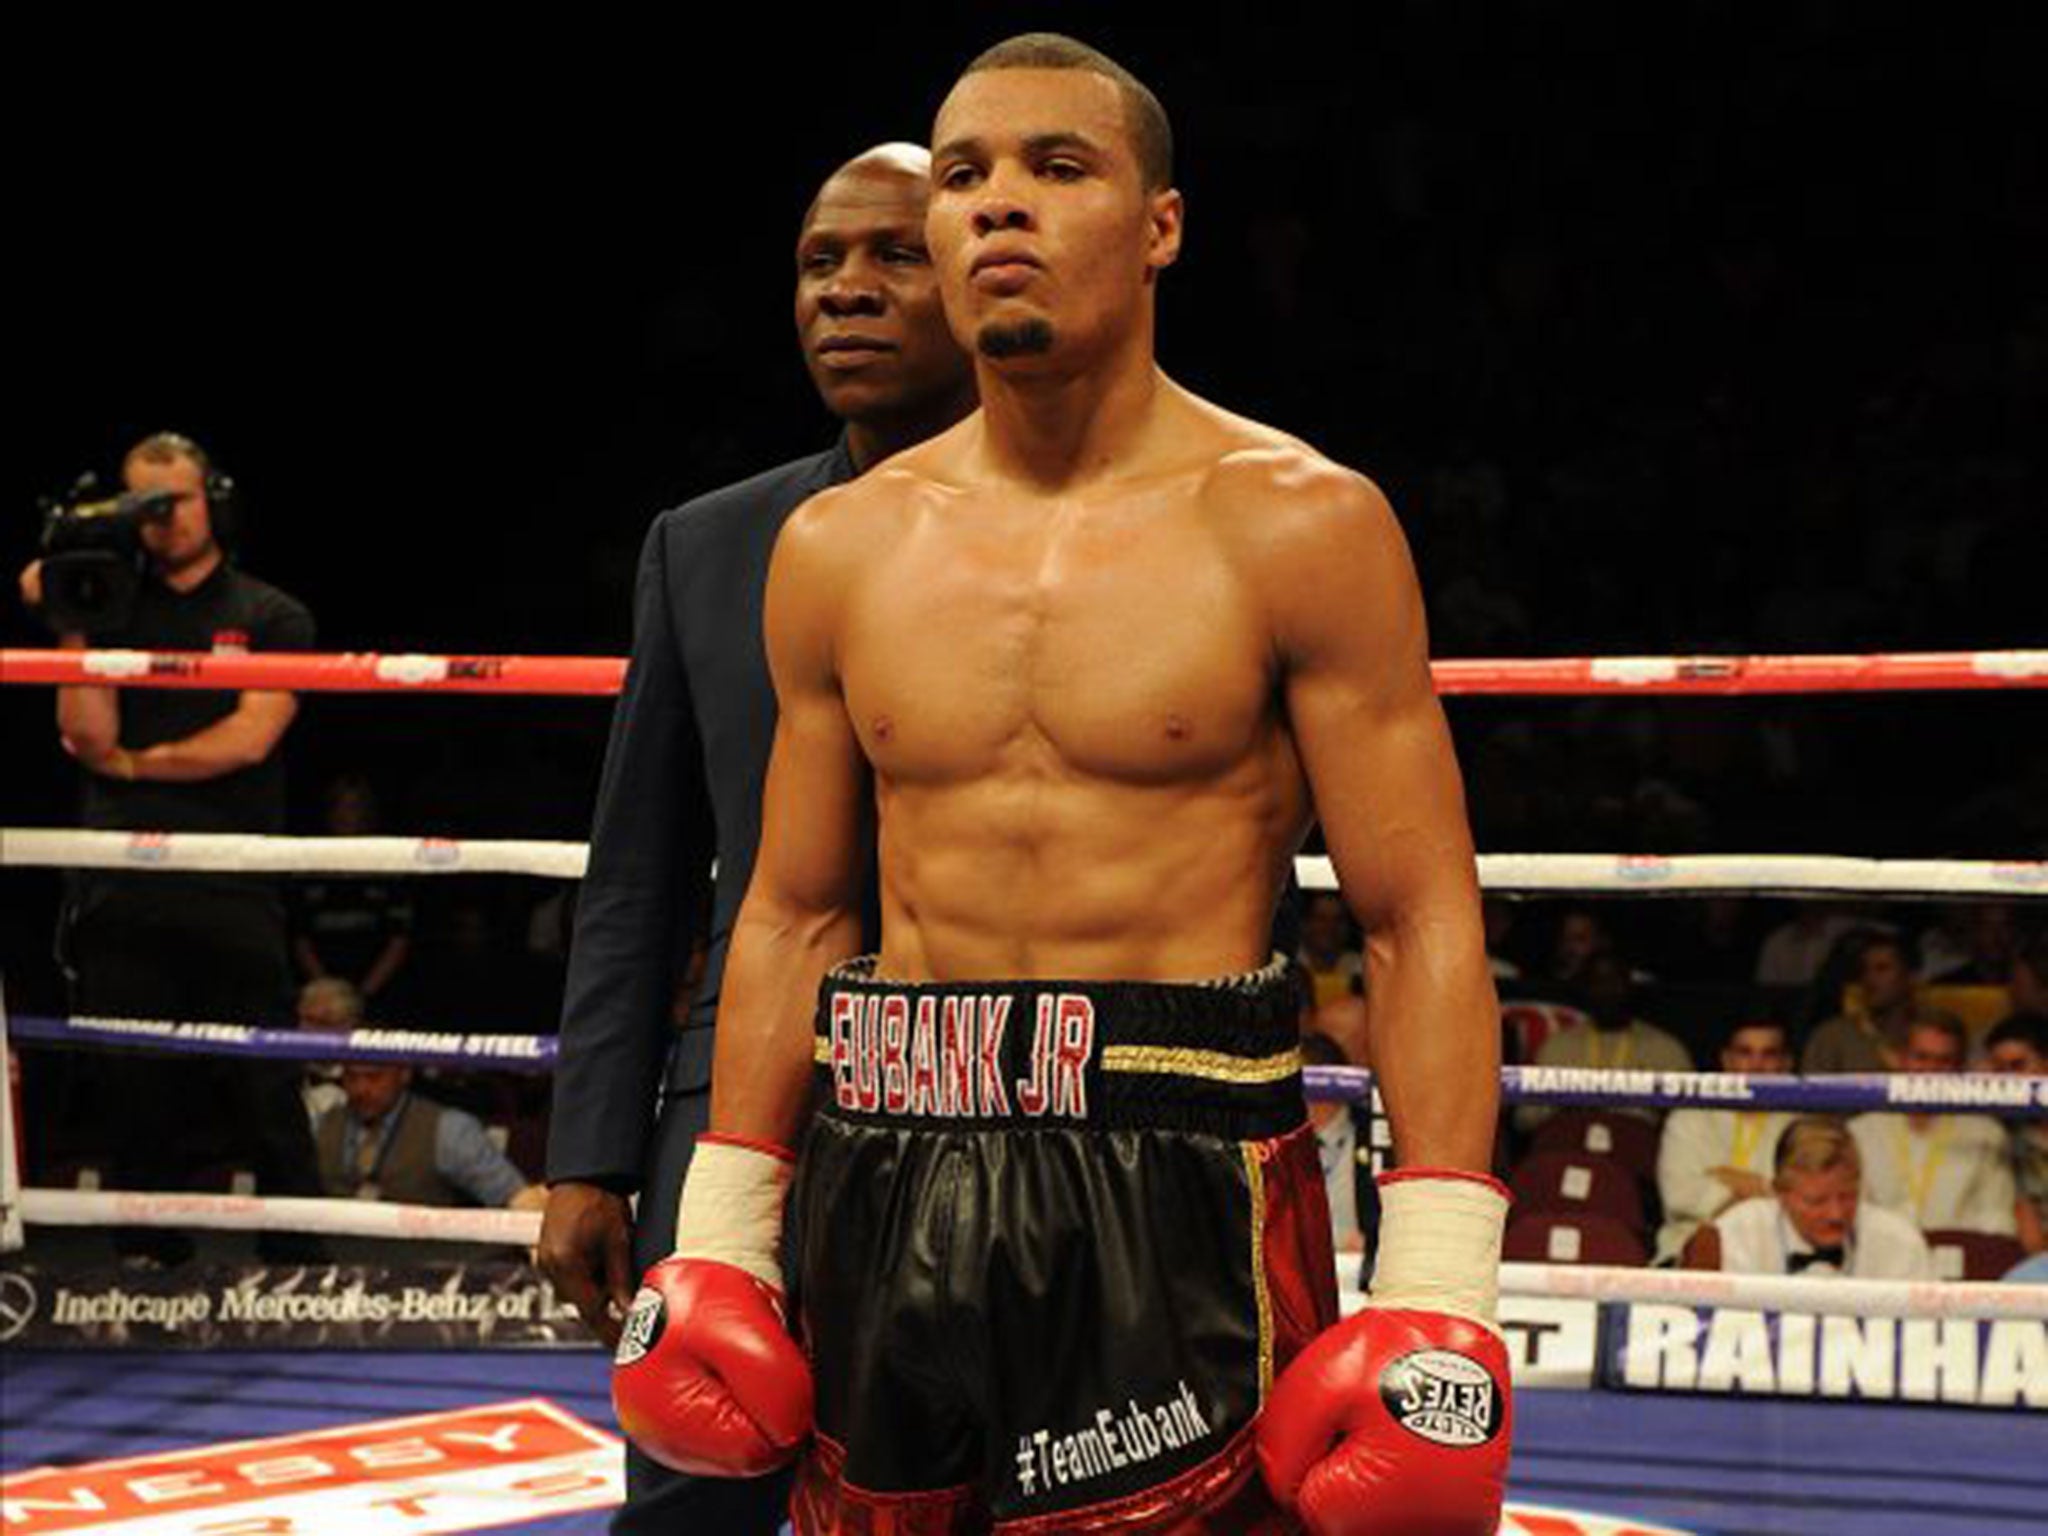 Caught in the meddle: The promising career of Eubank Jnr, managed by his father, appears to be on hold after the Saunders fight was scrapped